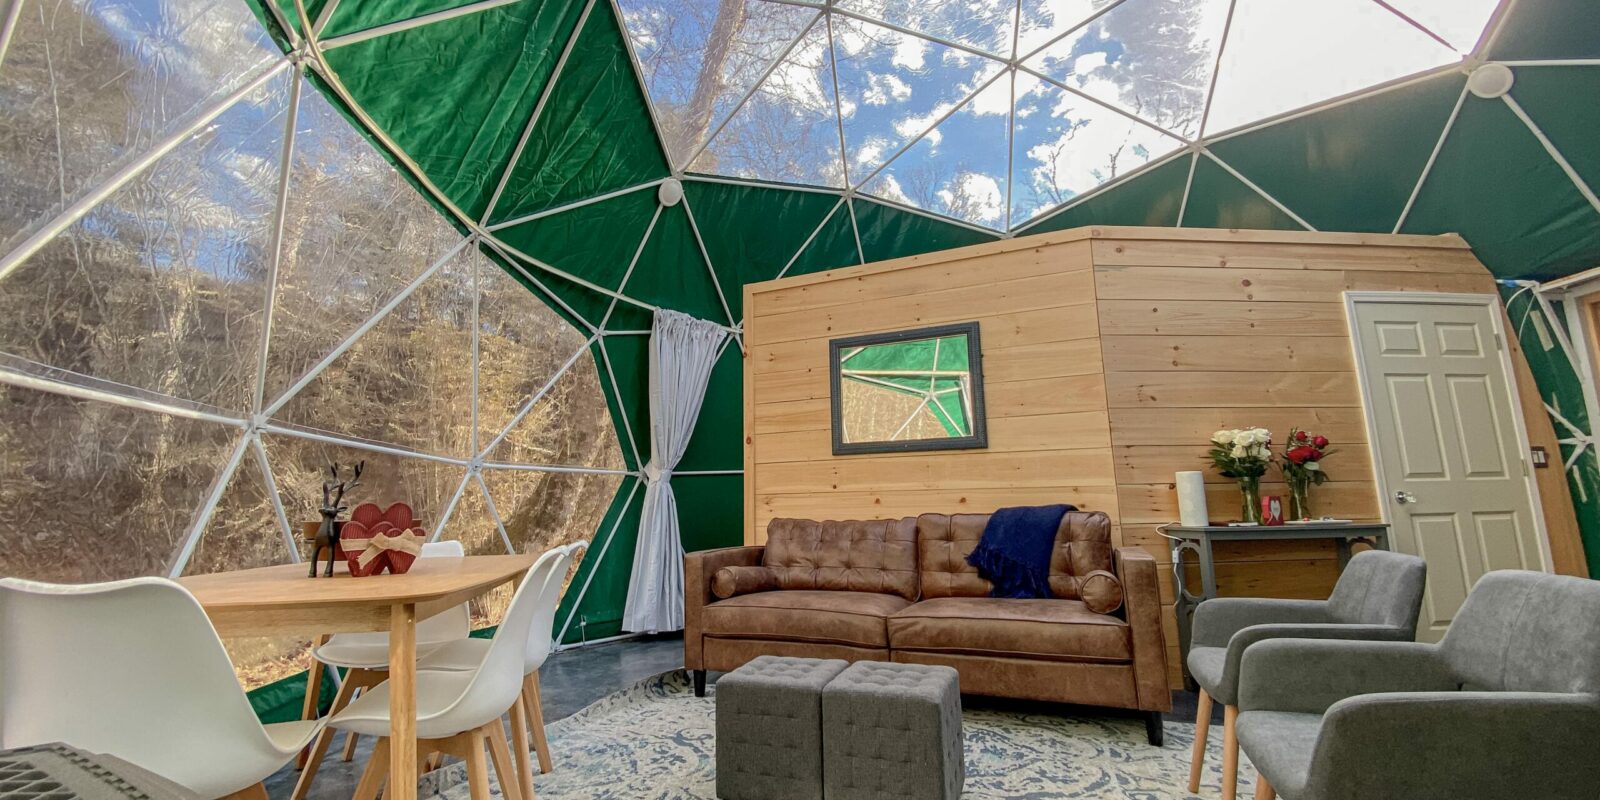 The Manor Glamping Dome for large groups